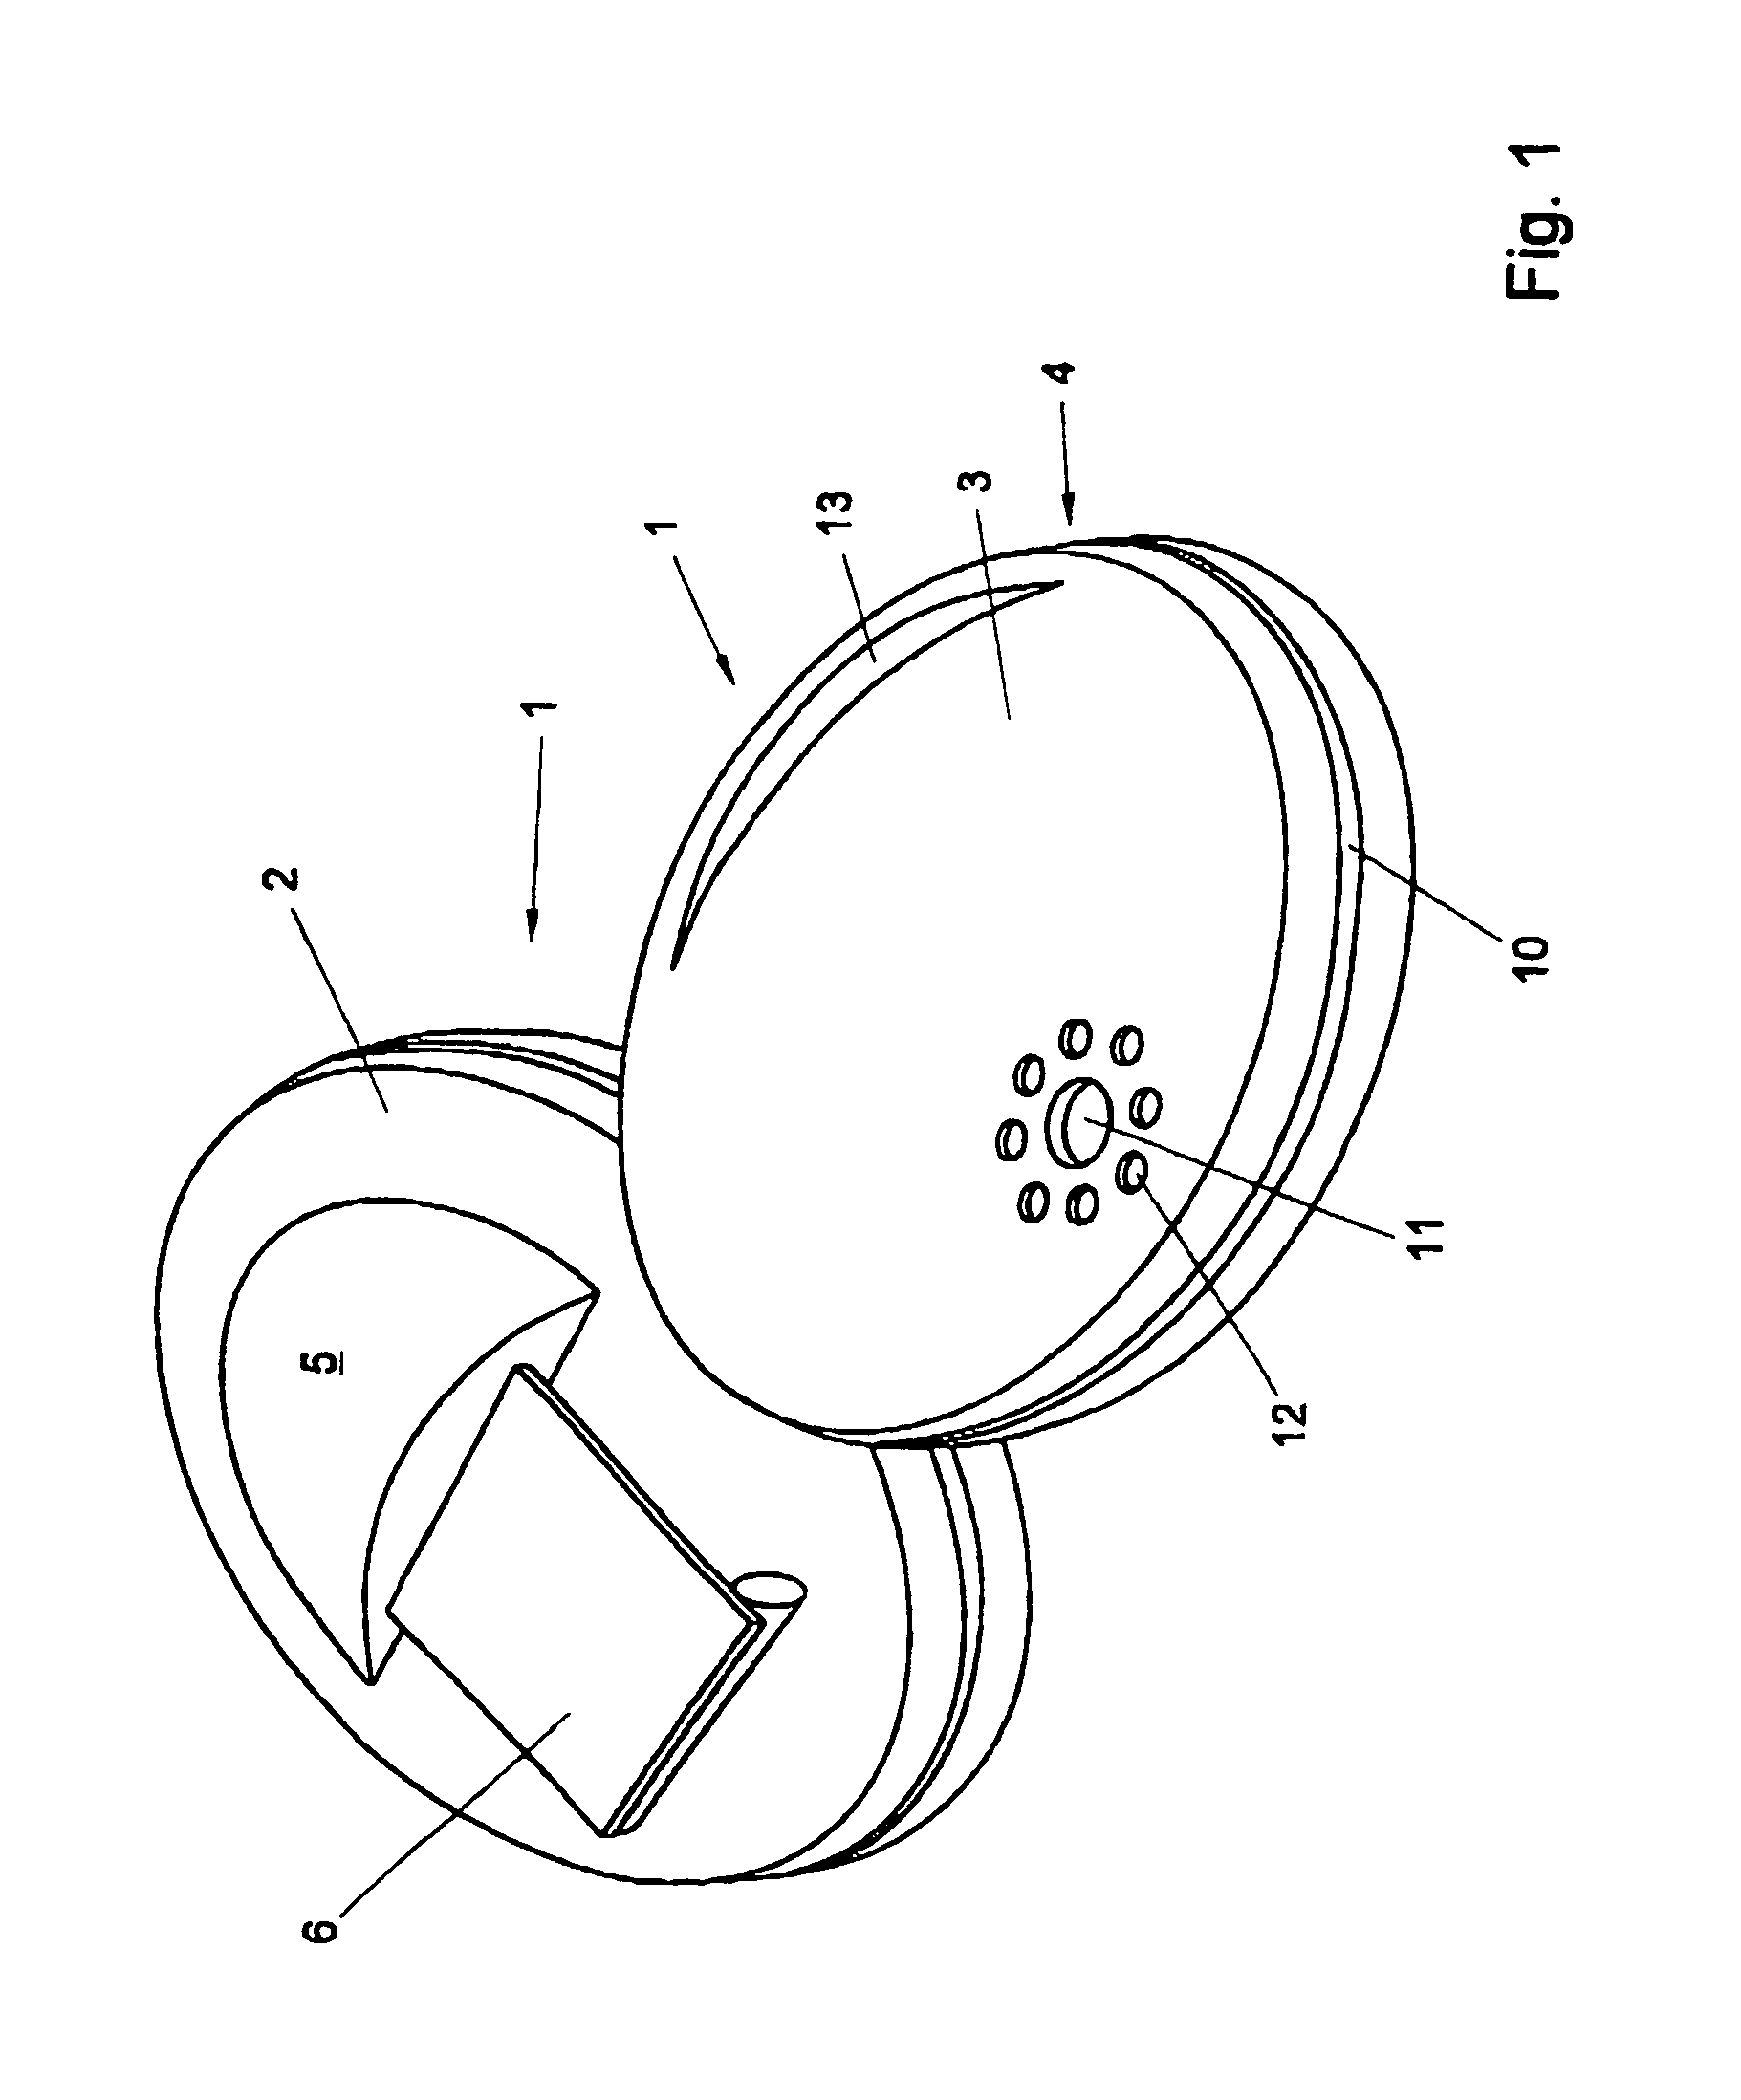 Method and apparatus for registering movement patterns of human beings